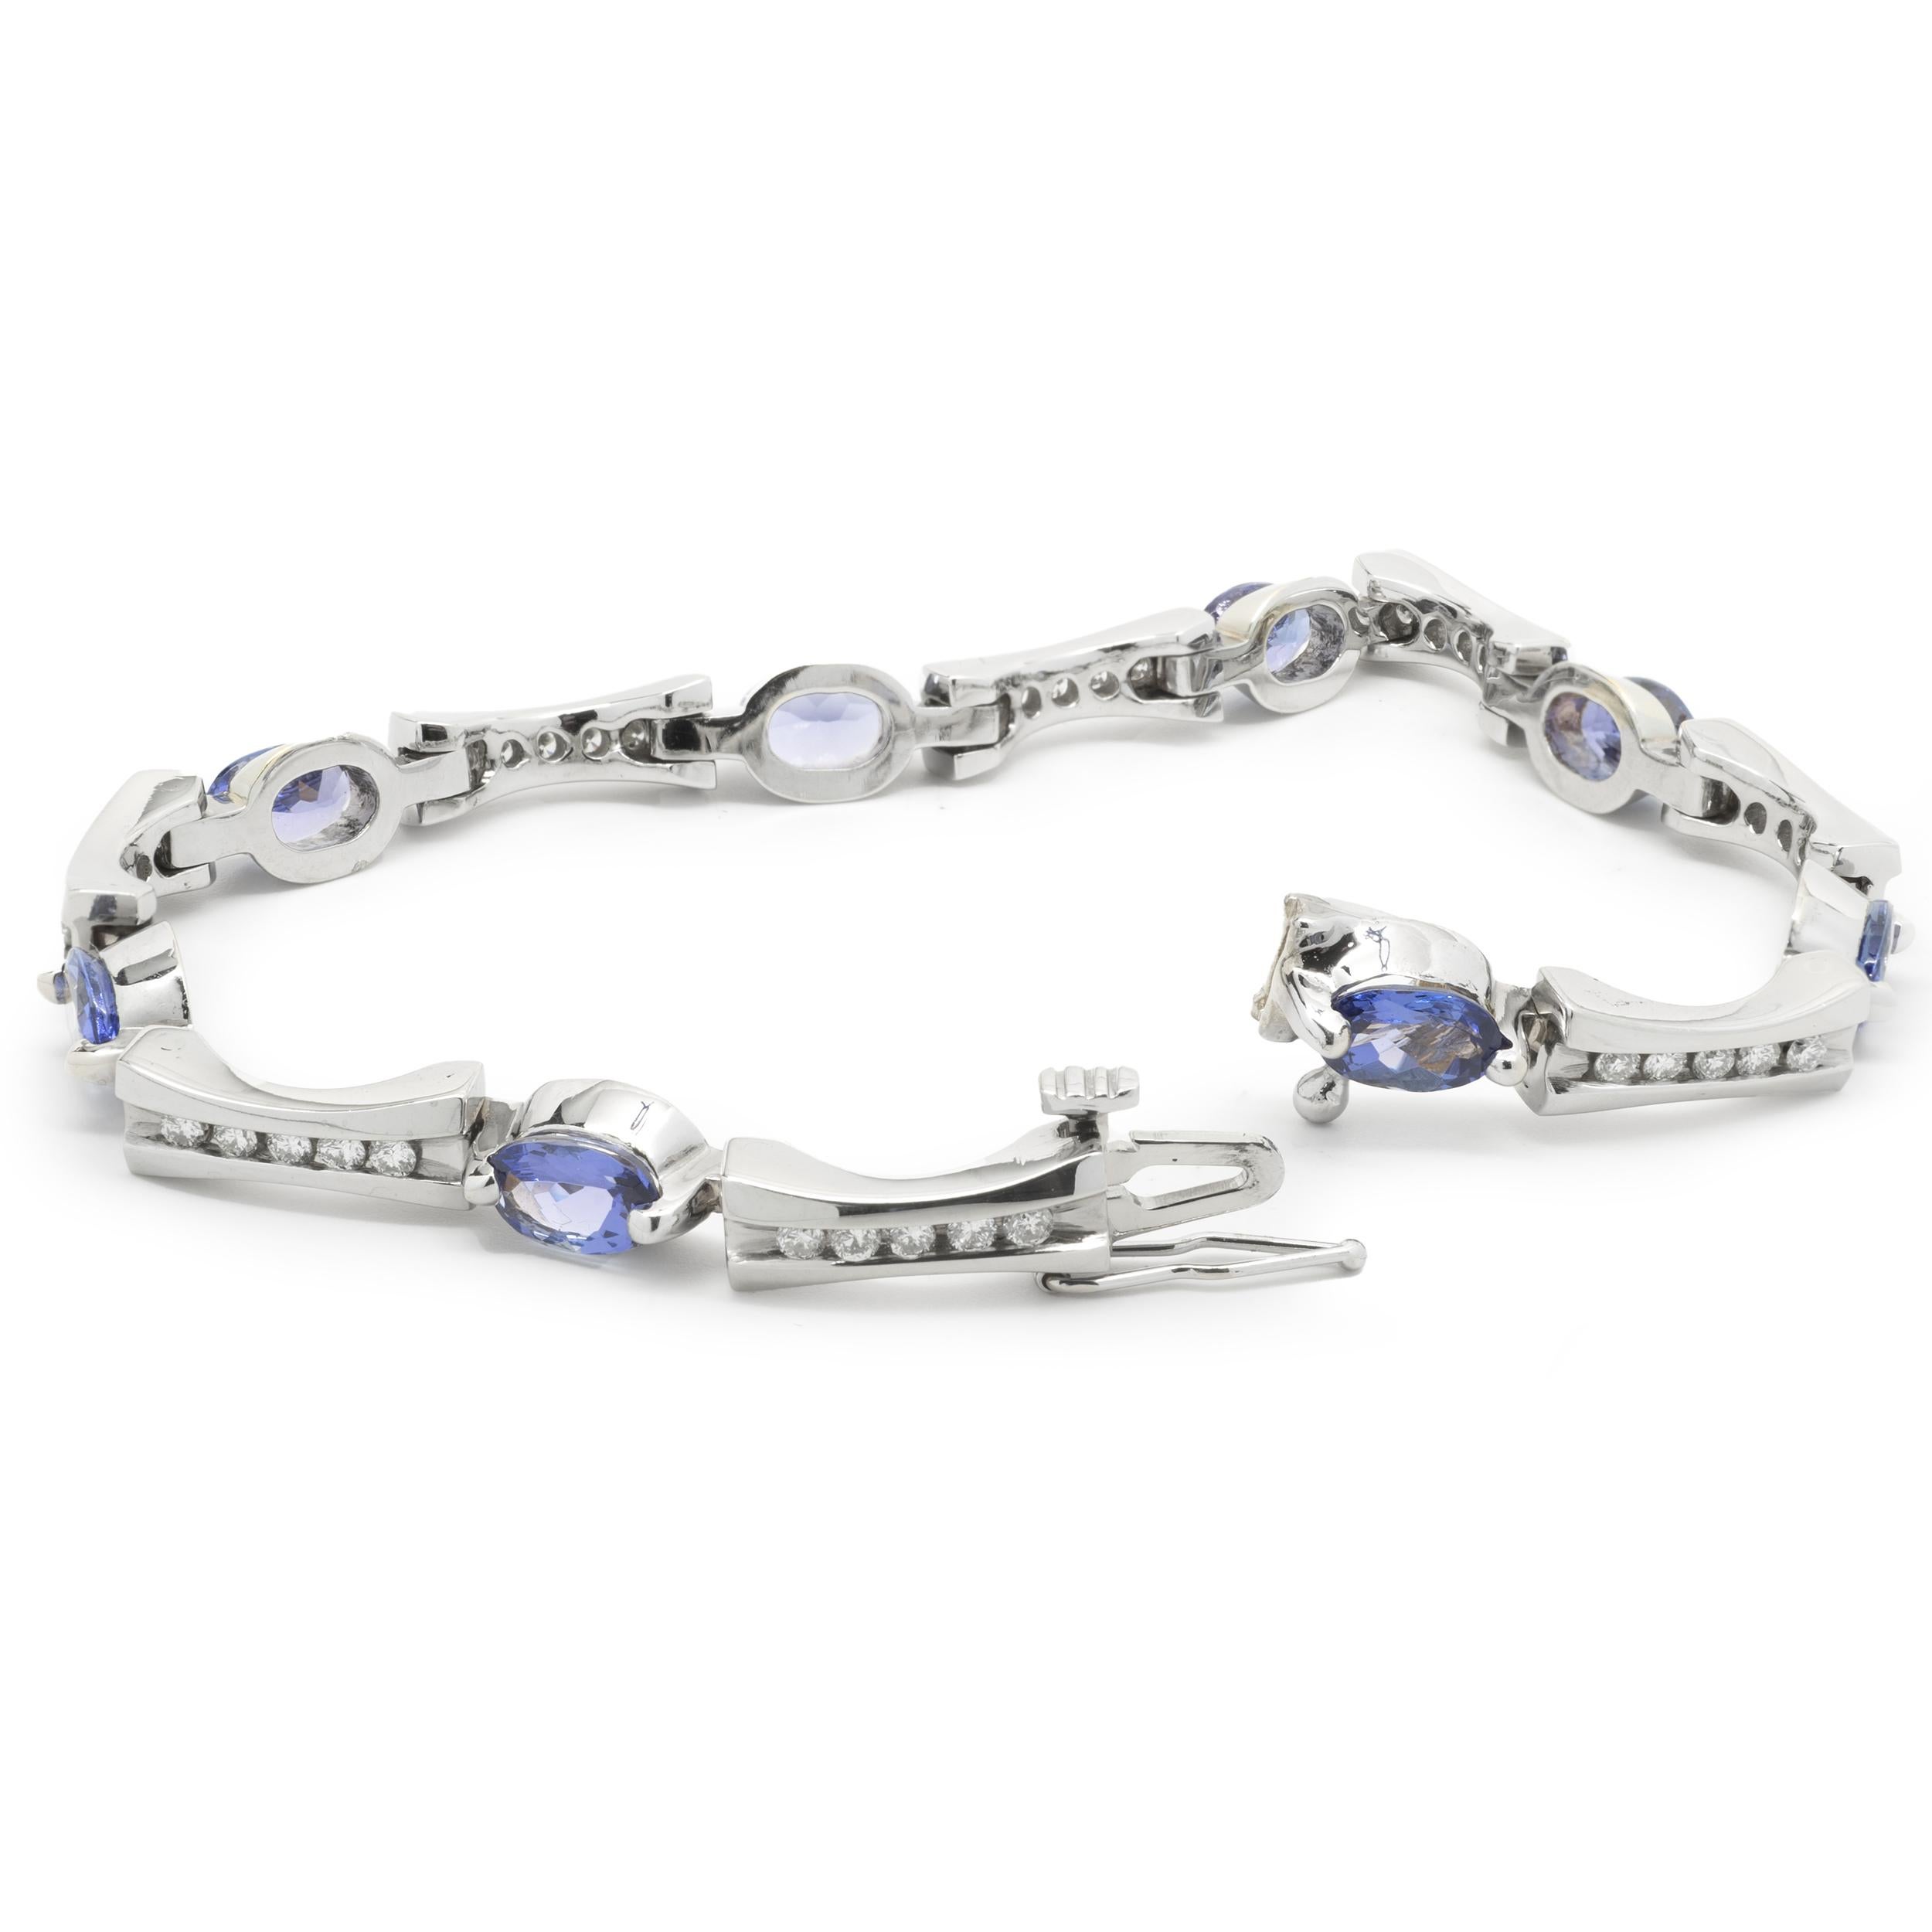 Designer: custom
Material: 14K white gold
Diamonds: 40 round brilliant cut = 0.40cttw
Color: G
Clarity: SI1
Tanzanite: 8 oval cut = 4.56cttw
Dimensions: bracelet will fit up to an 6.5-inch wrist
Weight: 14.69 grams
